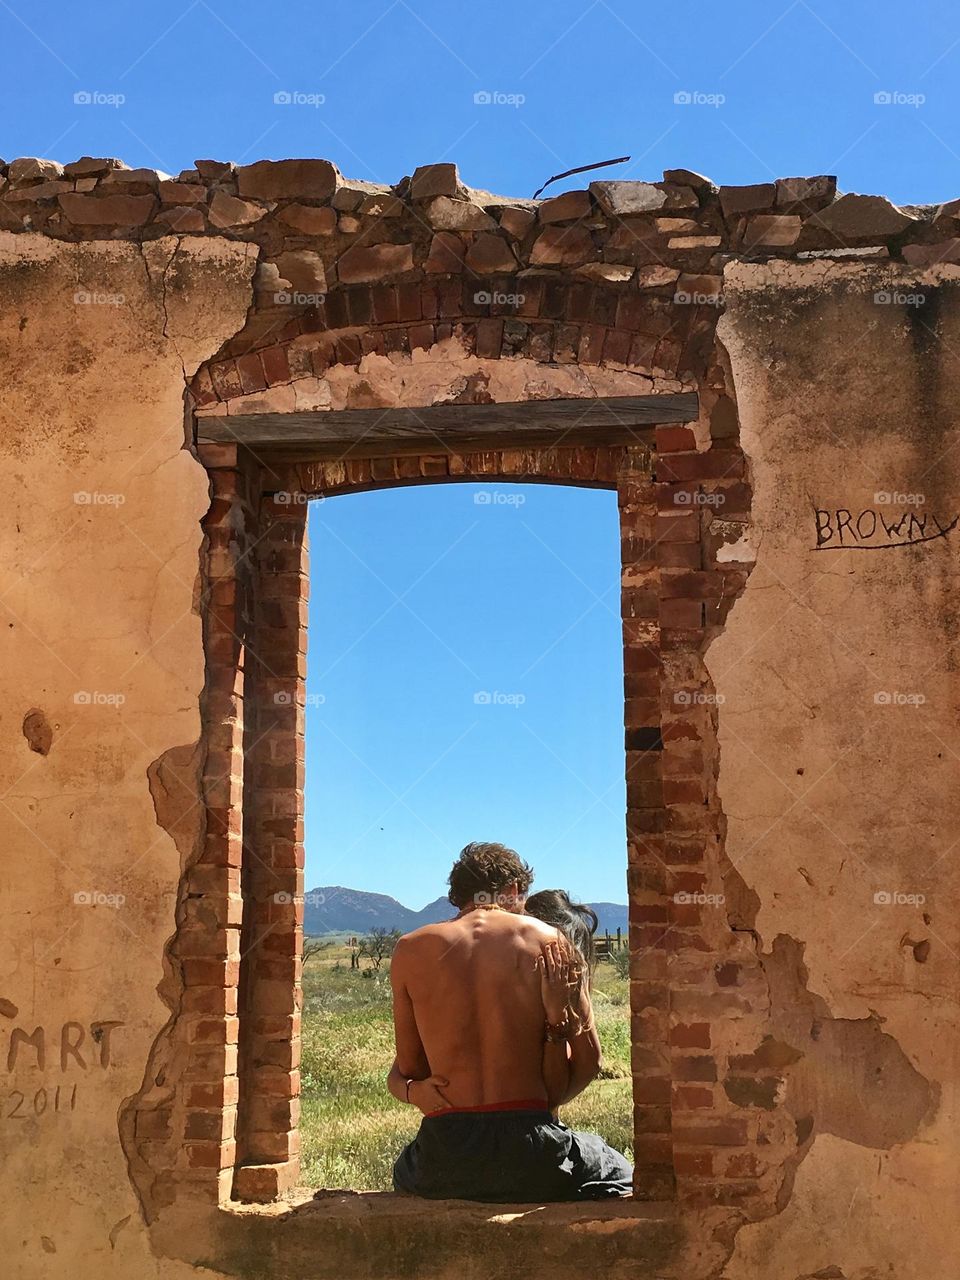 Young couple kissing and embracing in brick doorway of old brick house ruin in rural outback South Australia, with view of Flinders Ranges and outback bush, sunny blue sky viewable through the portal 